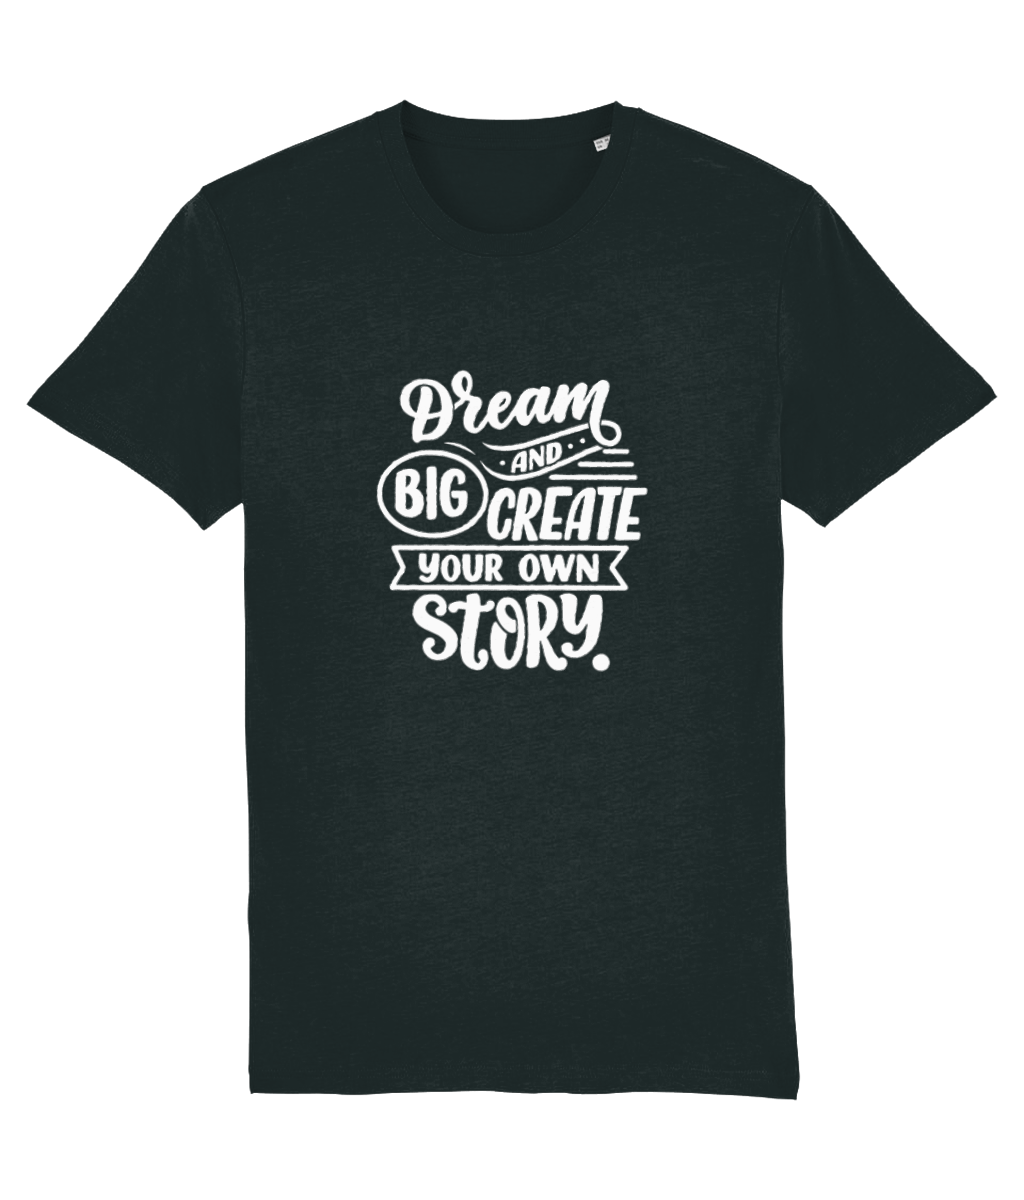 Dream Big and Create Your Own Story - T-shirt